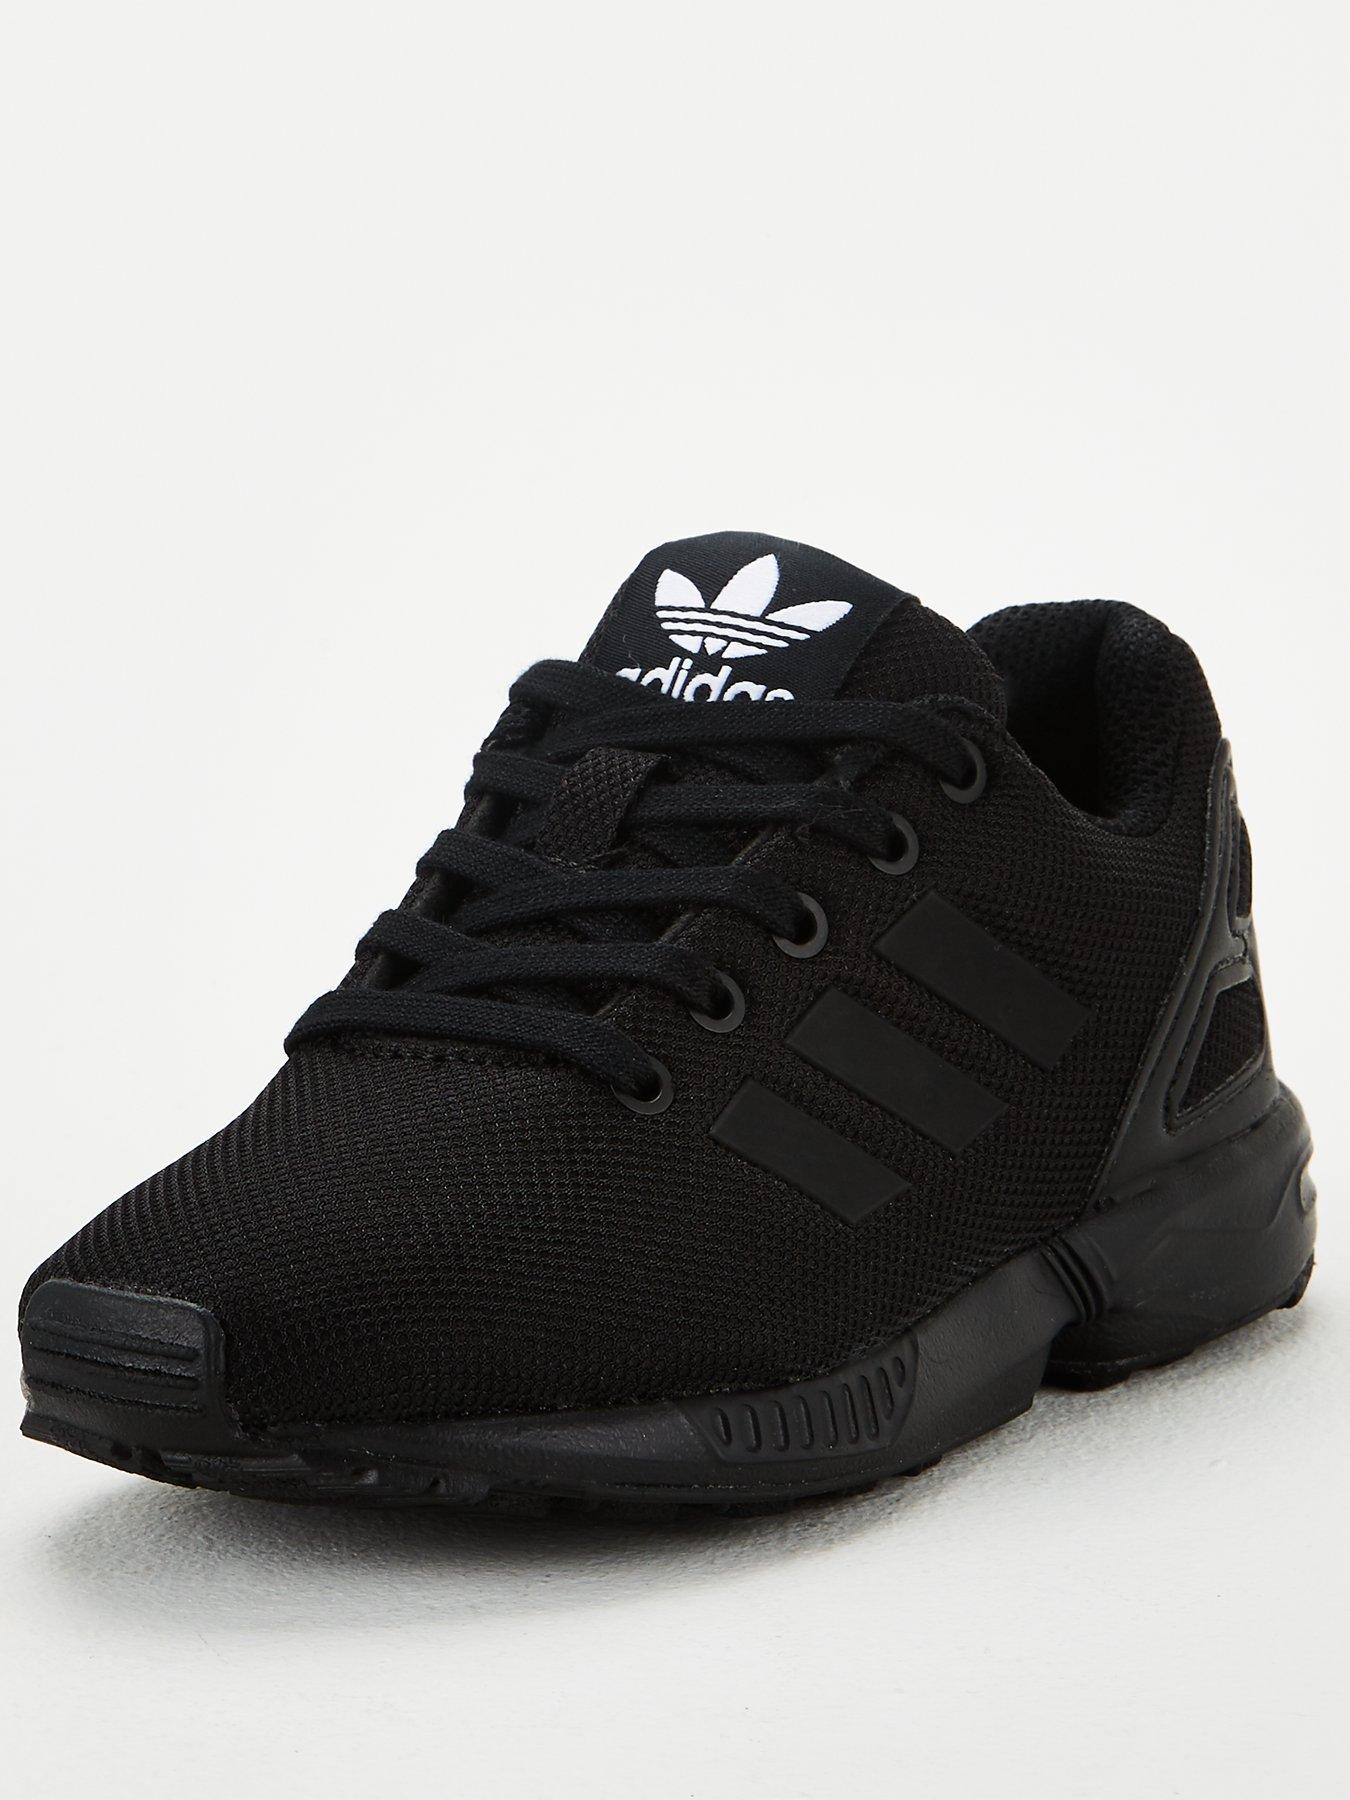 adidas flux trainers